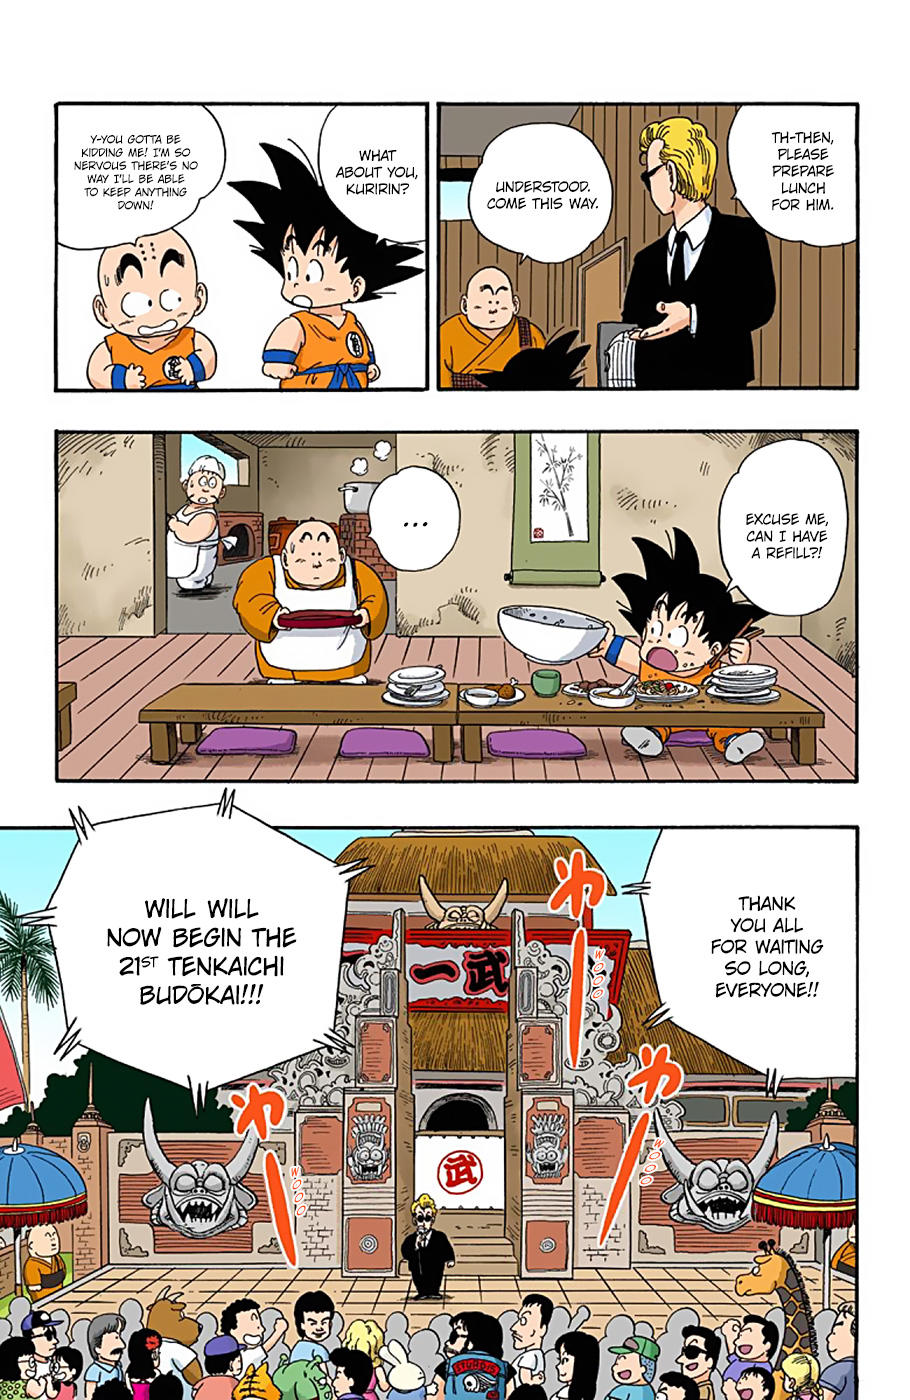 Dragon Ball - Full Color Edition Vol.3 Chapter 35: The Match-Ups Decided!! page 13 - Mangakakalot